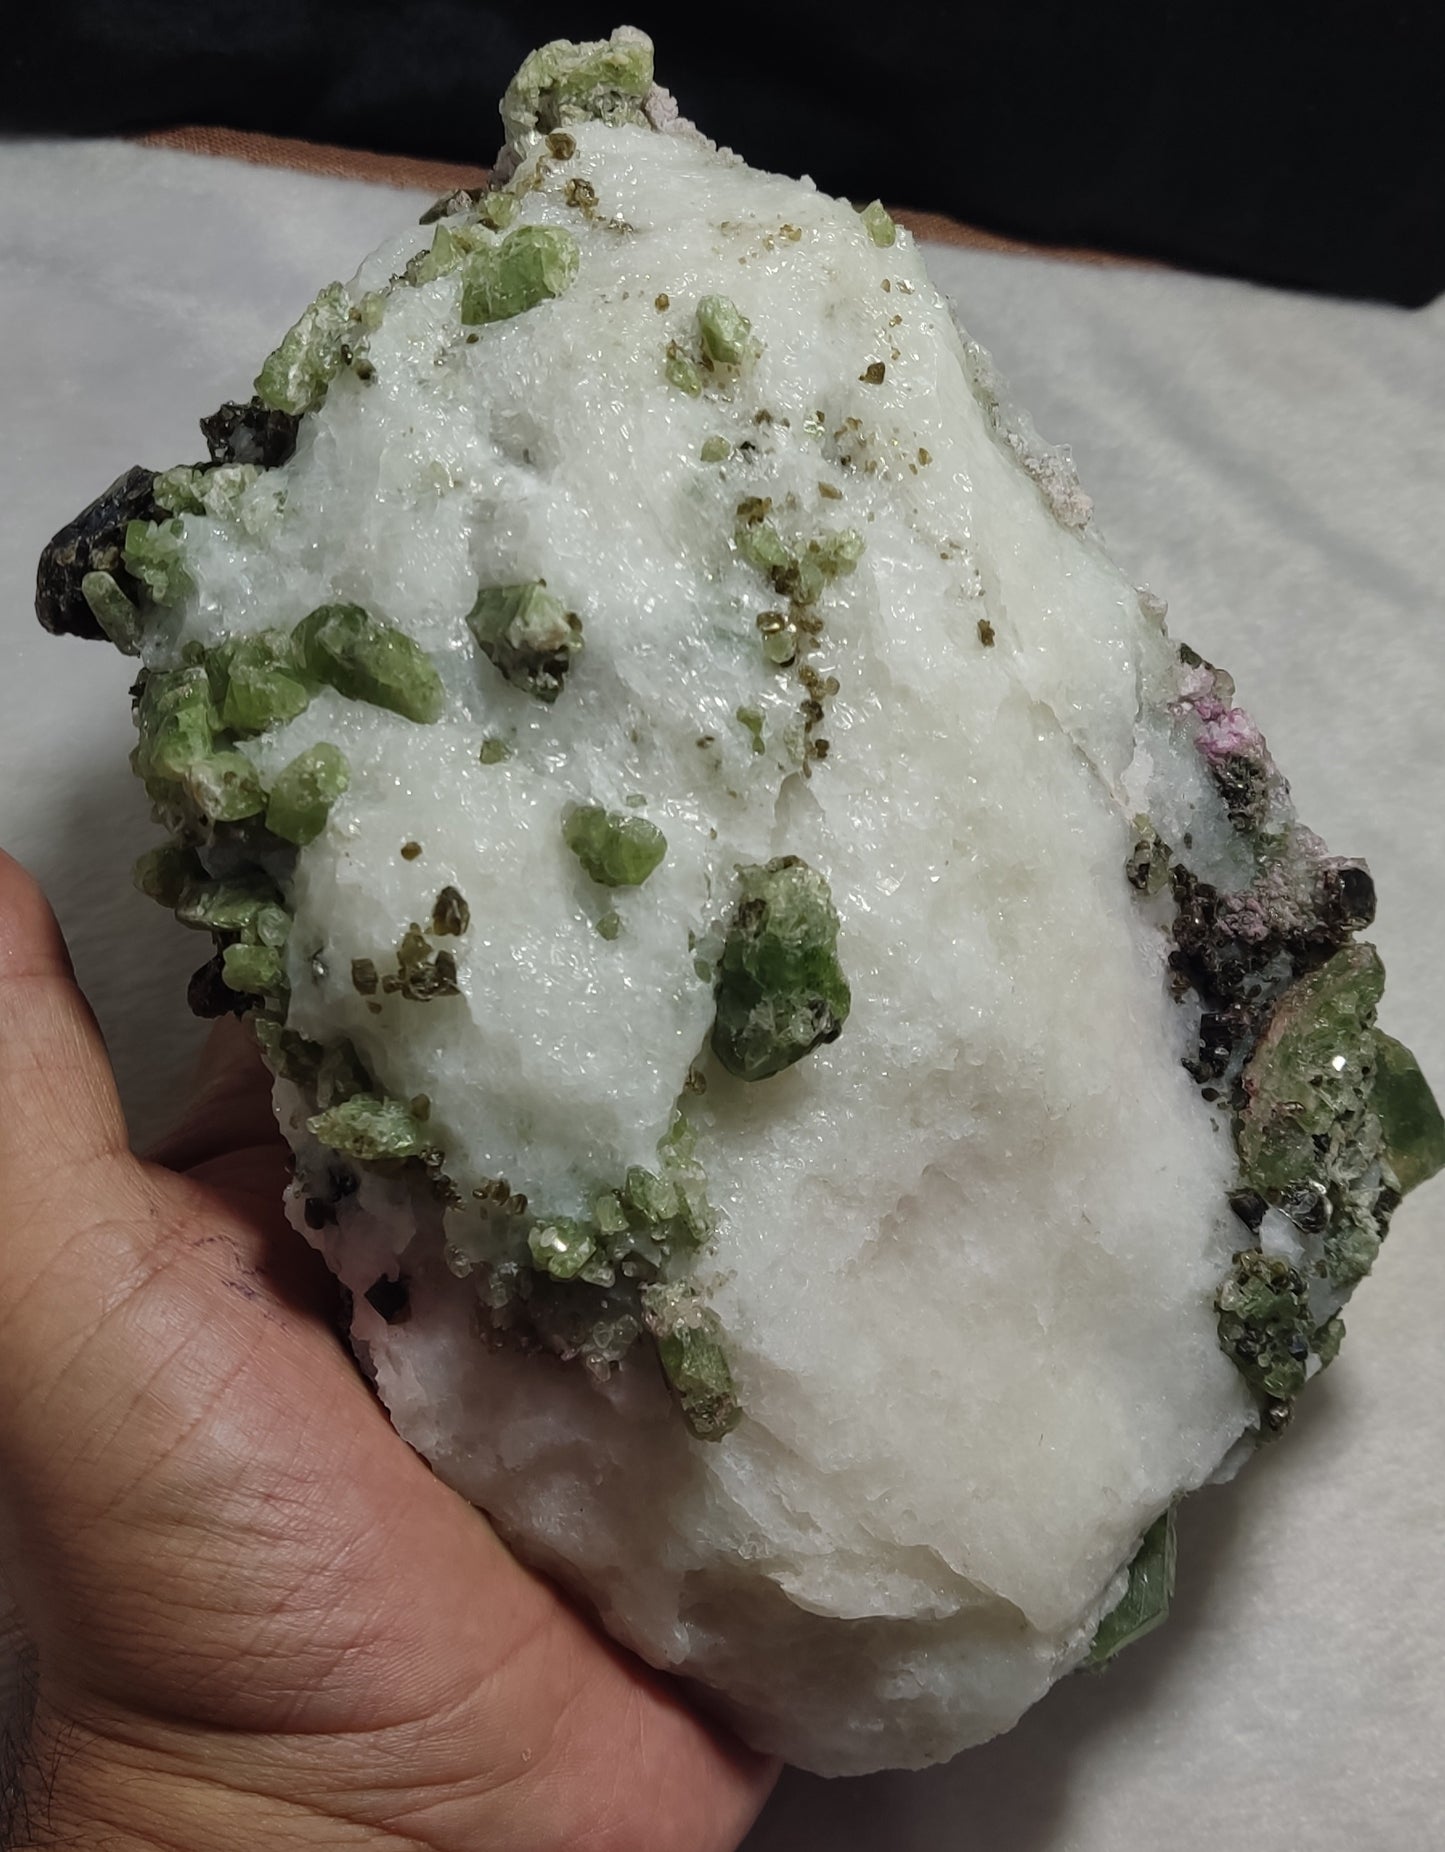 Large Green diopside crystals on matrix with mica 2400 grams